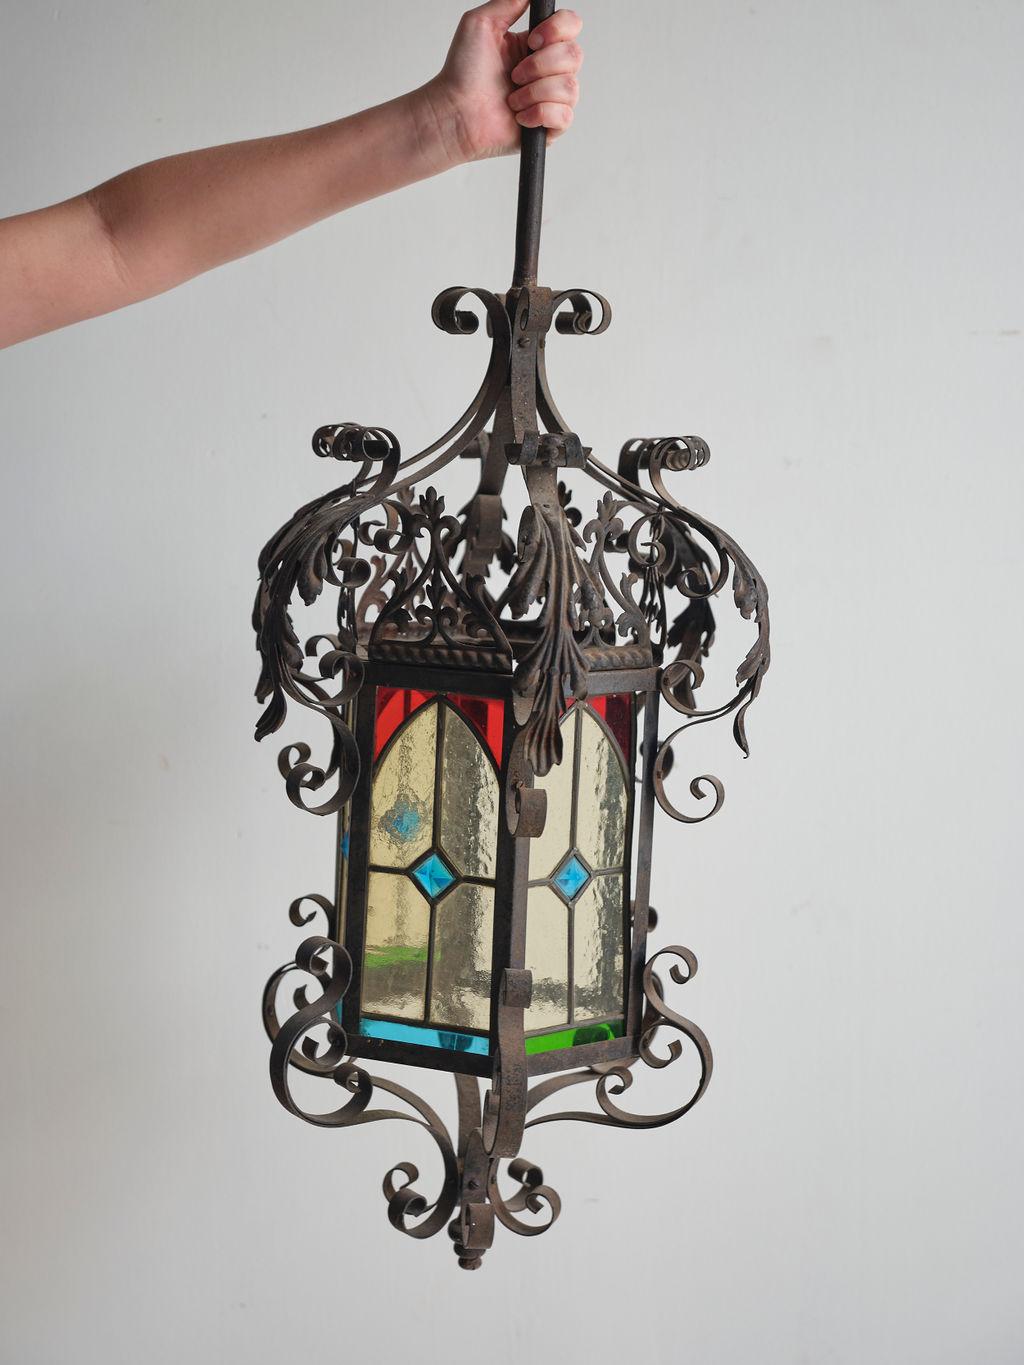 This stunning stained glass iron lantern, crafted in the early 20th century, would add a beautiful touch to any room it is in. The unique stained glass and the curved iron details really give this lantern a beautiful look. This lantern was